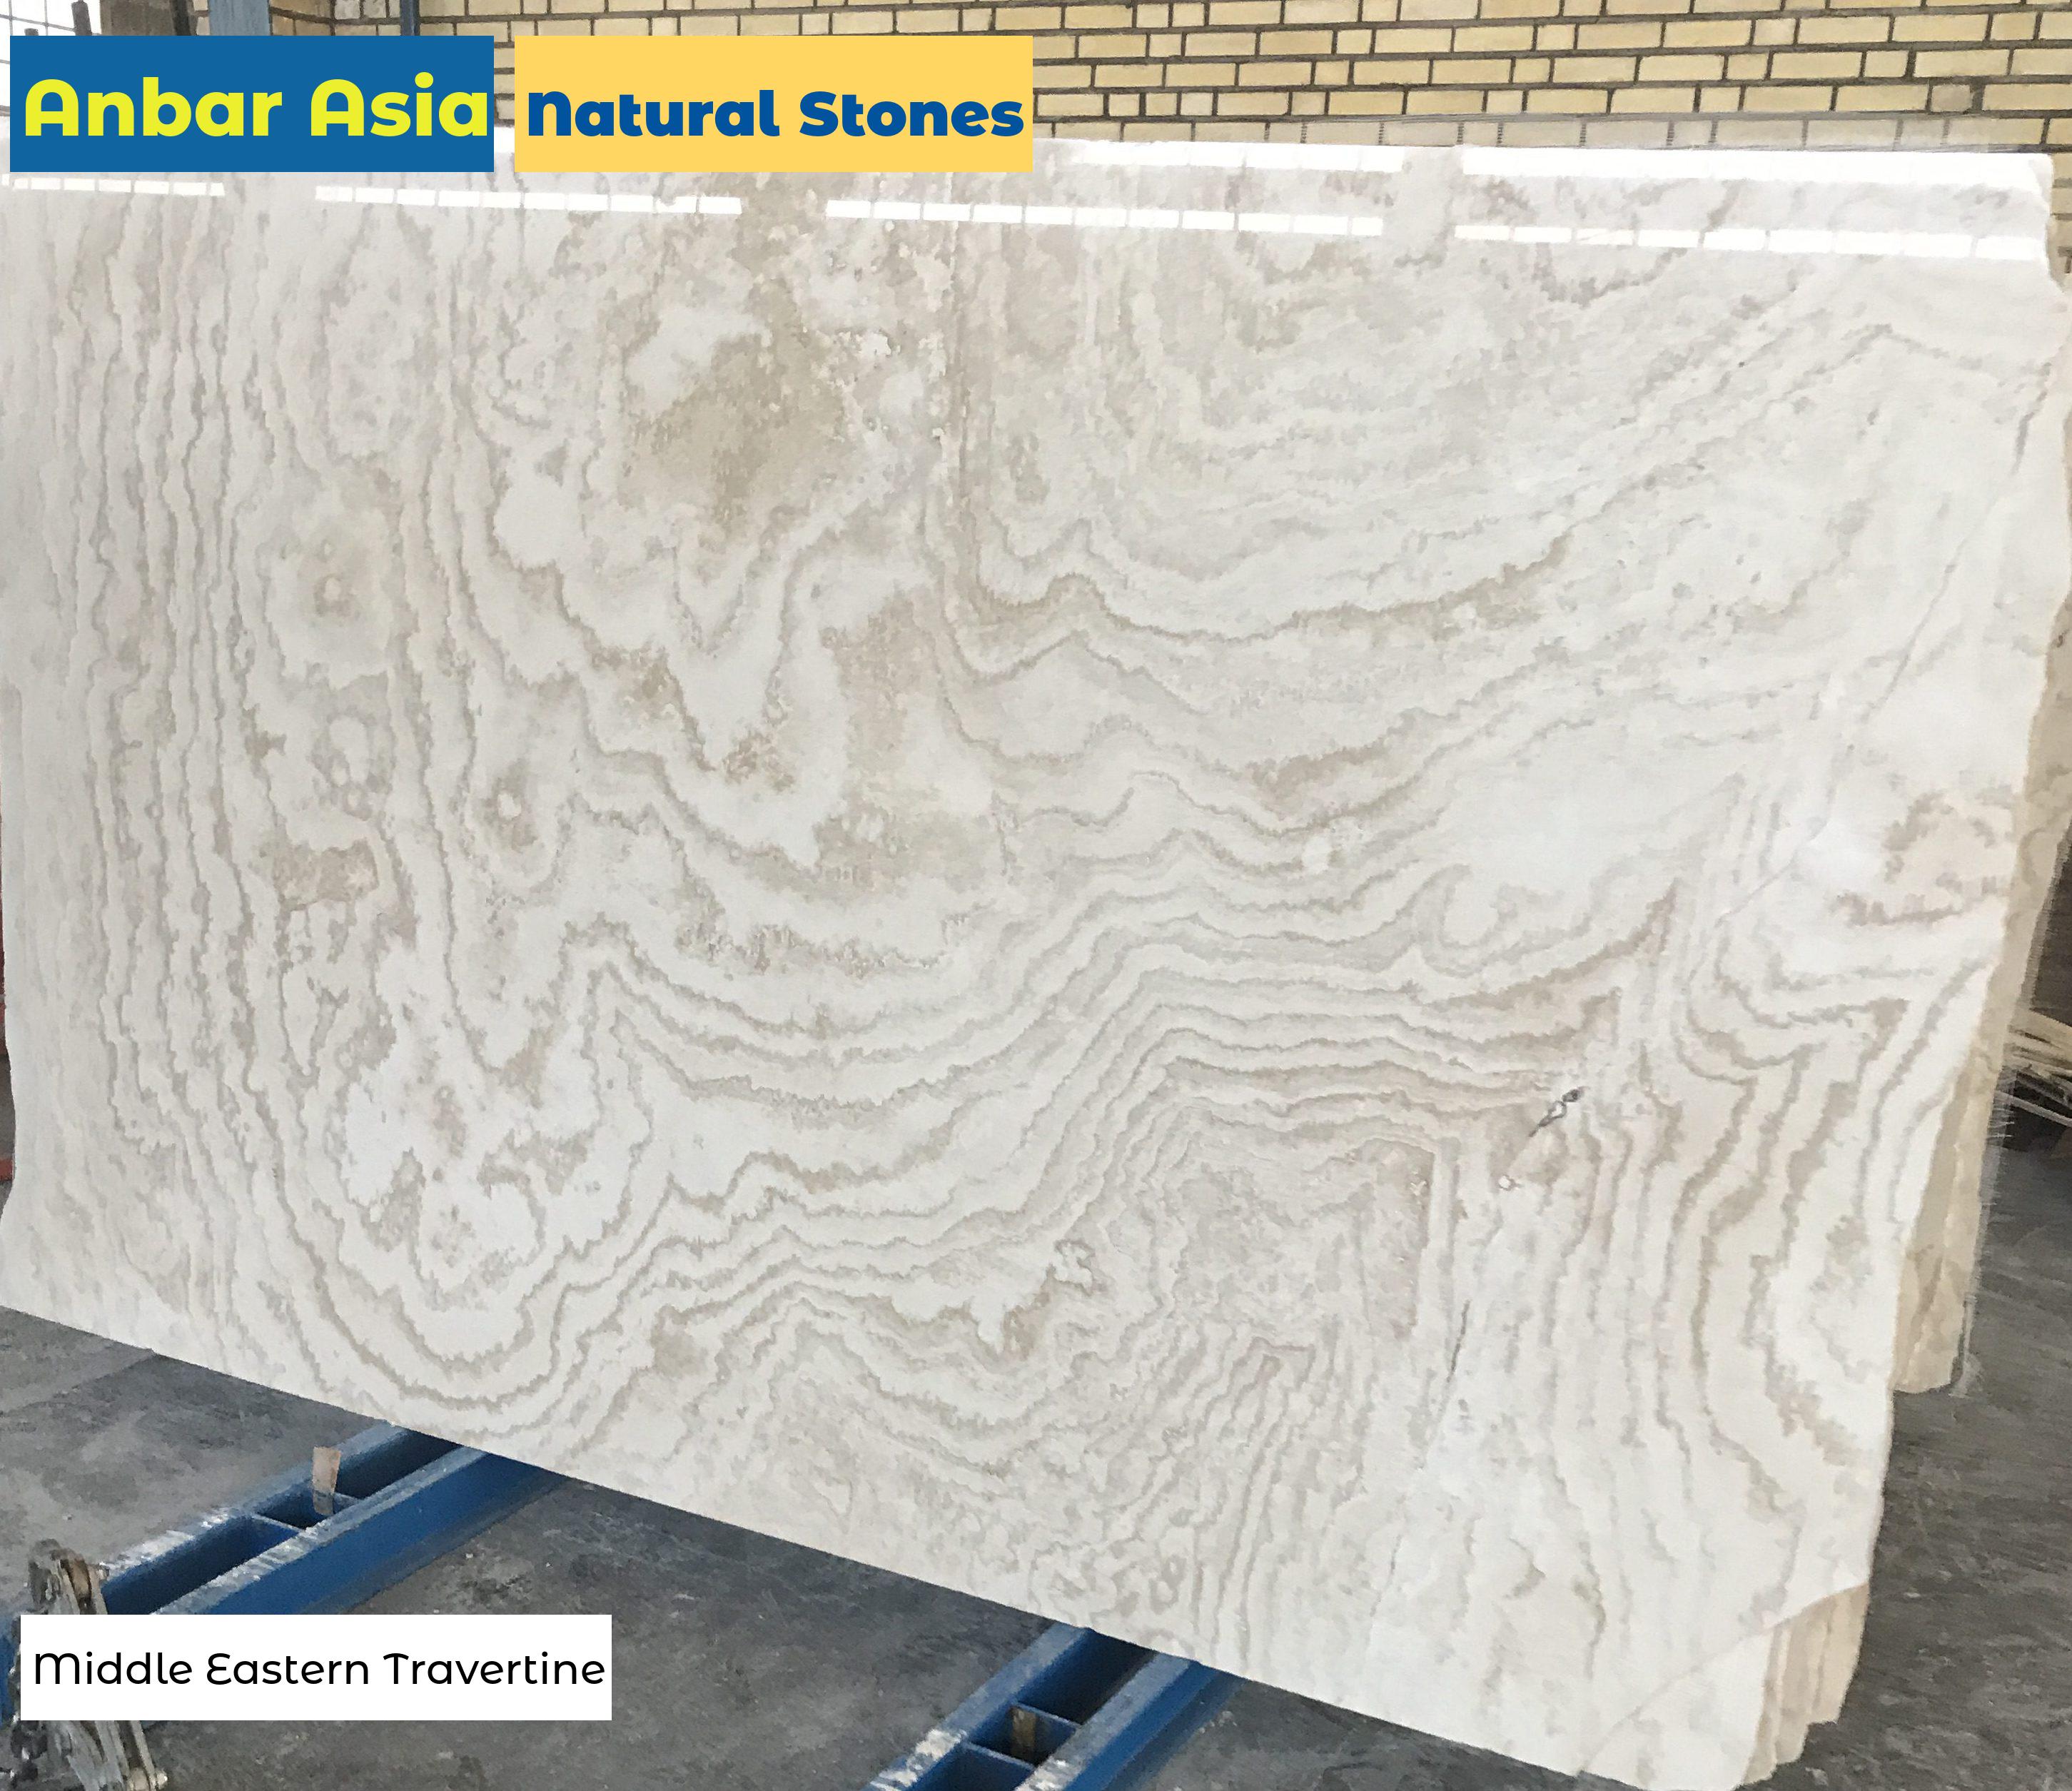 Middle Eastern Travertine